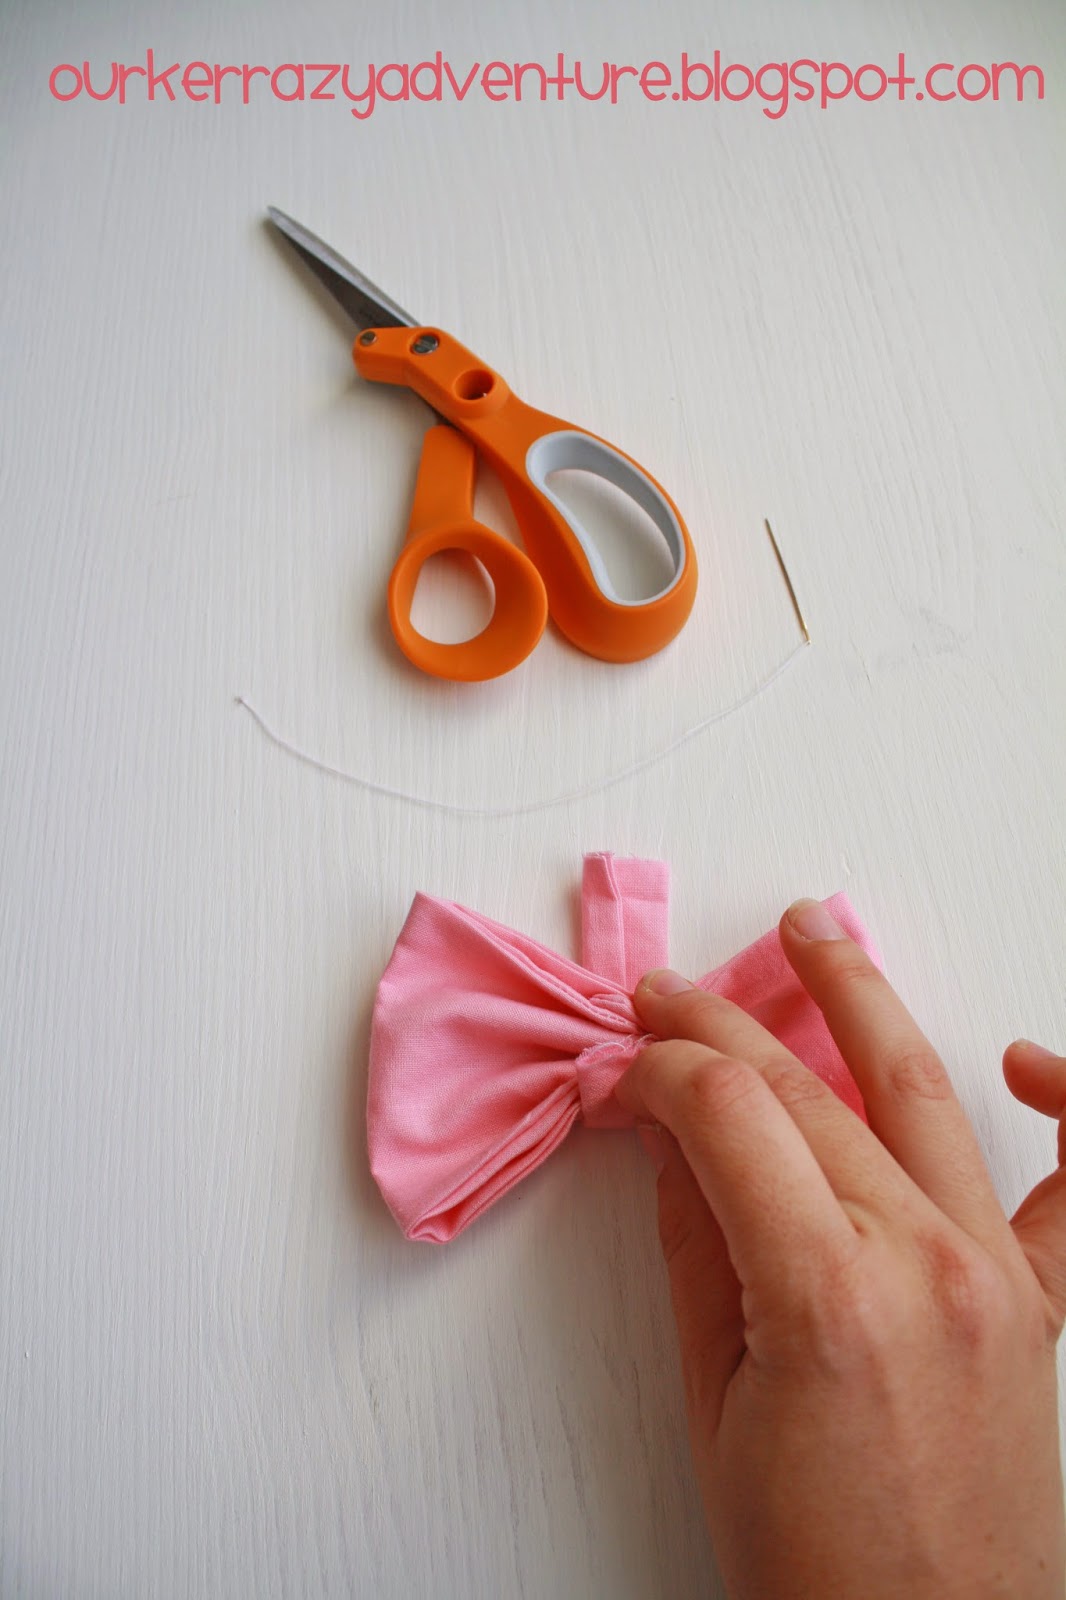 Our KERRazy Adventure: Cheater Bow Ties: An Easy Tutorial